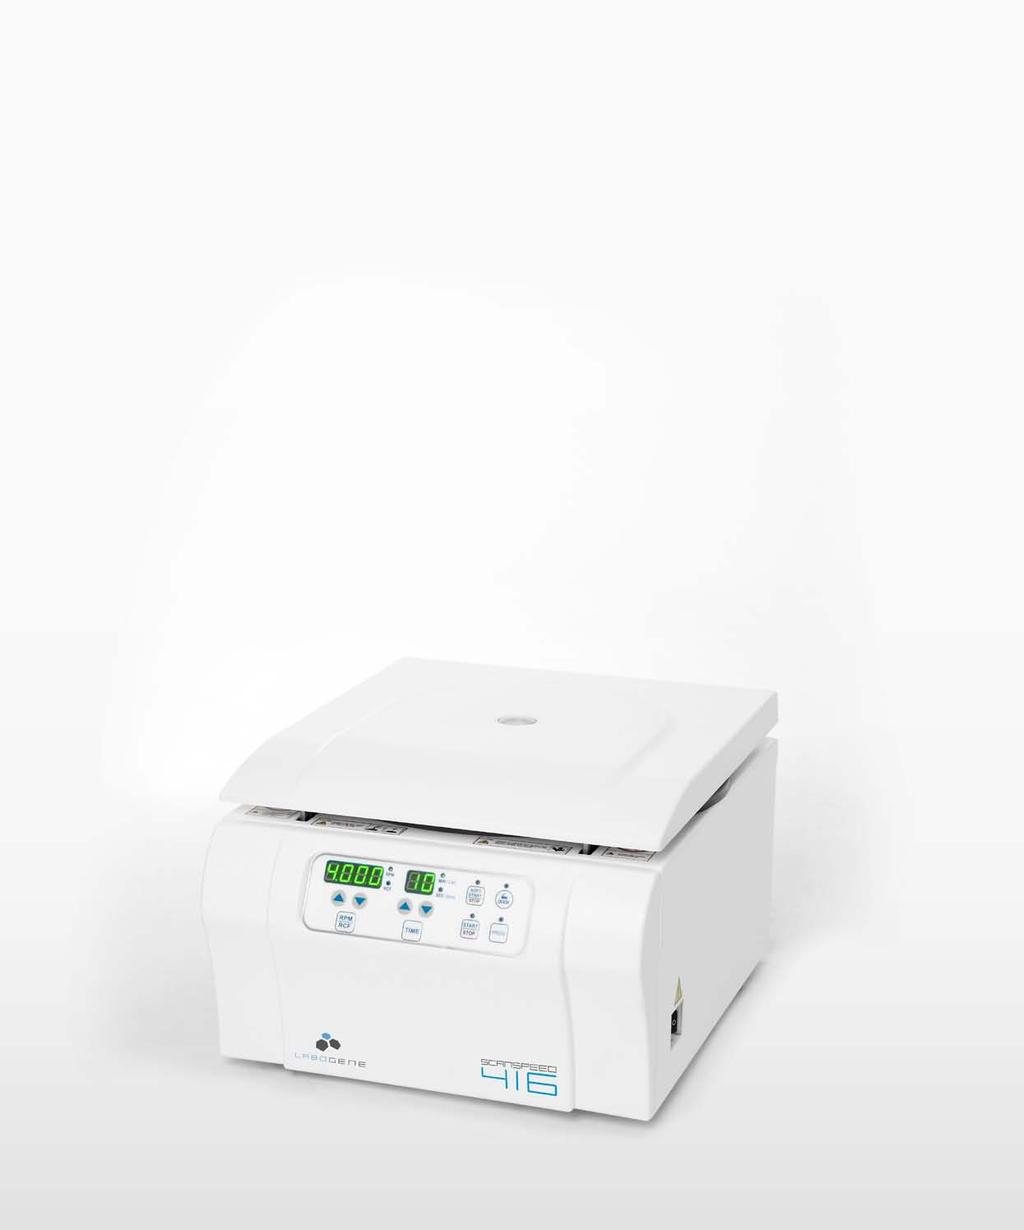 The ScanSpeed 416 Offers The ideal low speed centrifuge for general laboratory applications, including biological sample separations of cellular materials, blood, urine, sperm etc.